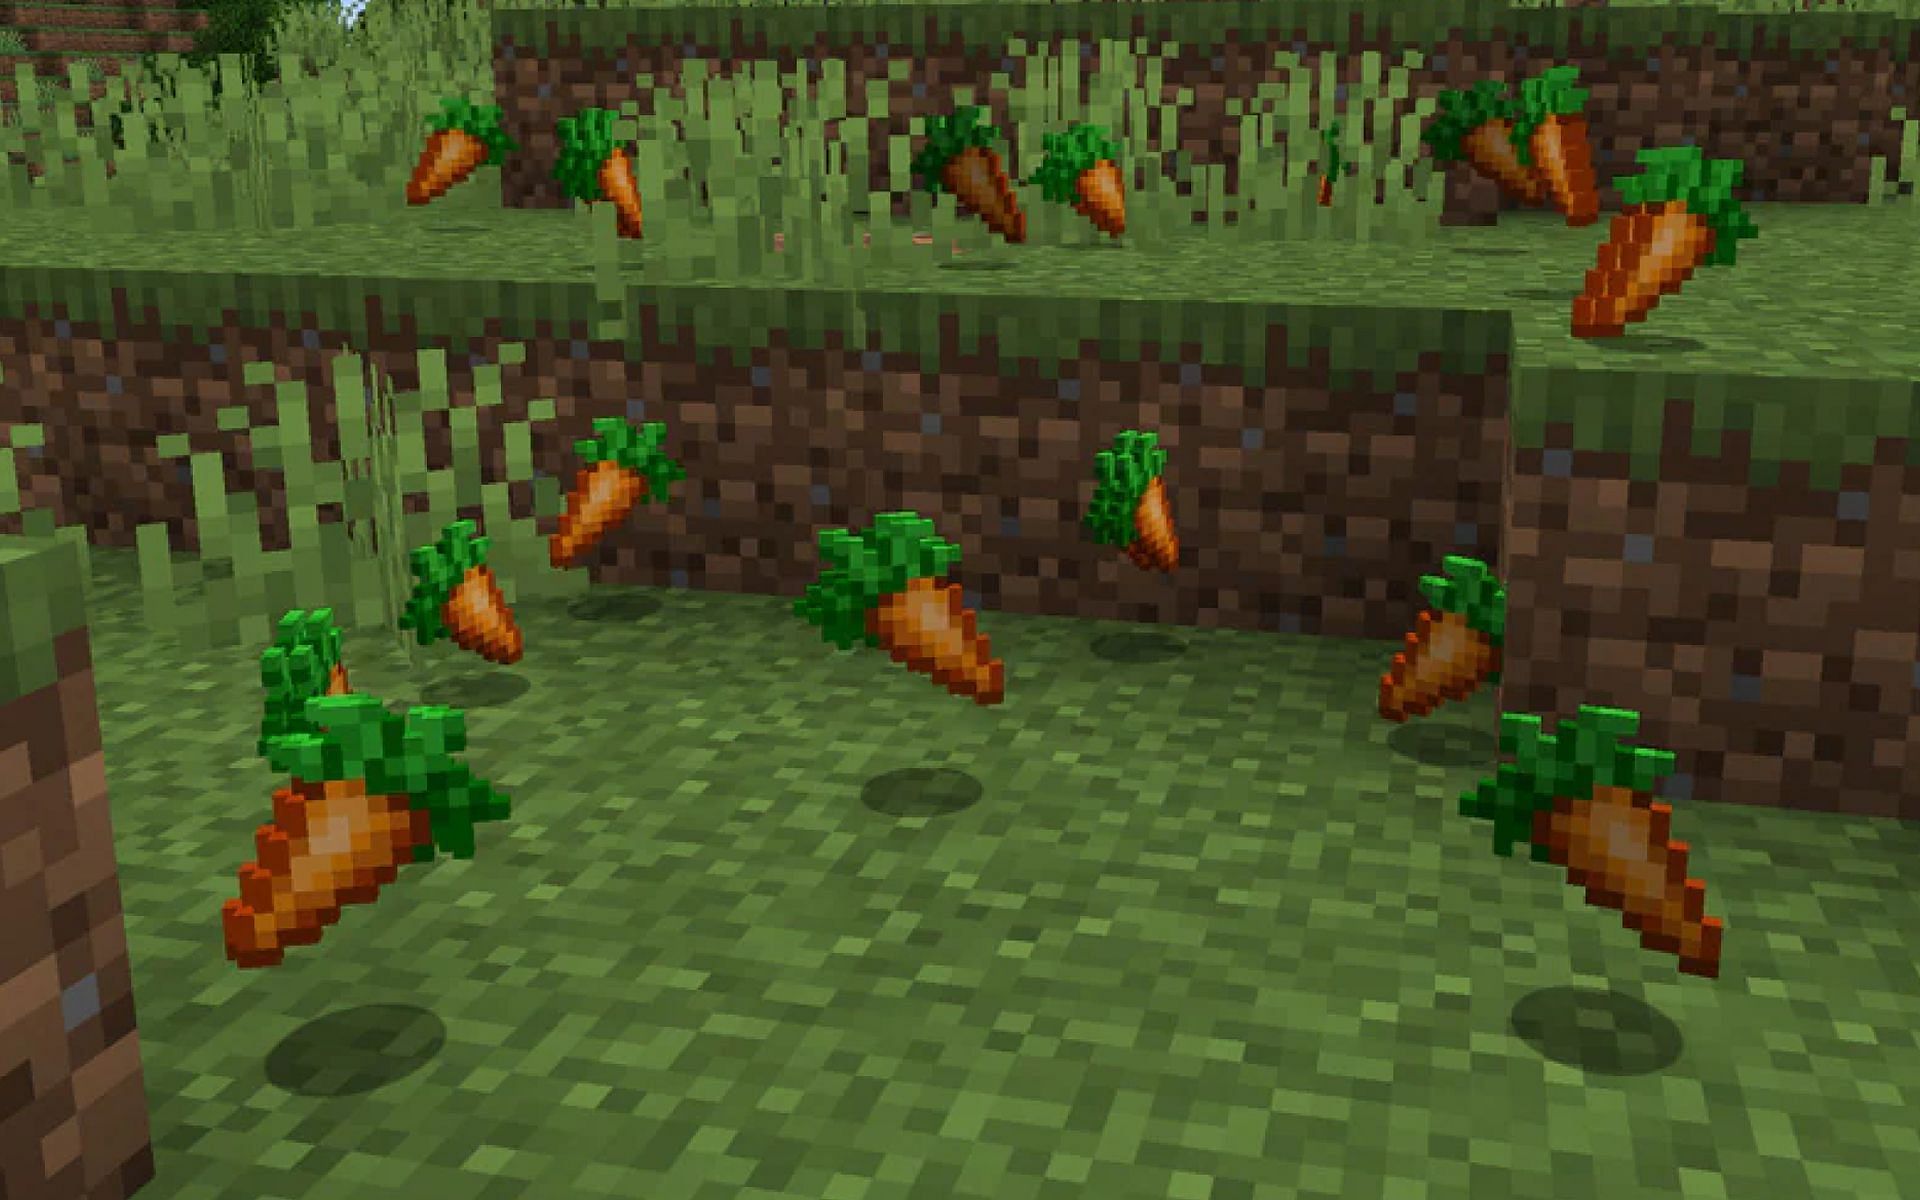 An image of several carrots on the ground in-game. (Image via Minecraft)